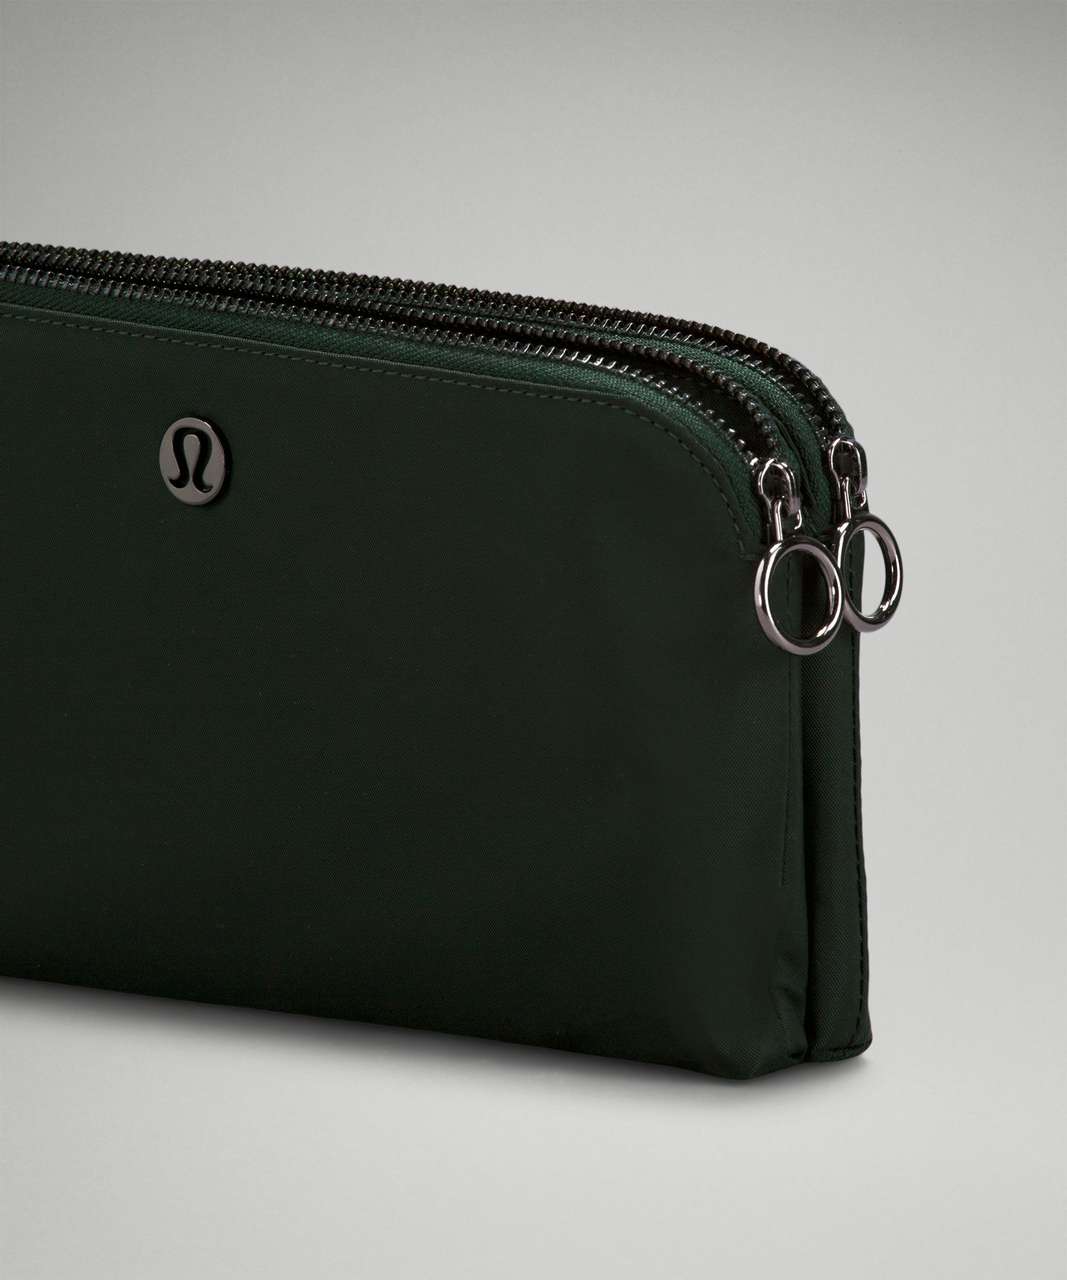 Lululemon Now and Always Pouch - Rainforest Green / Black